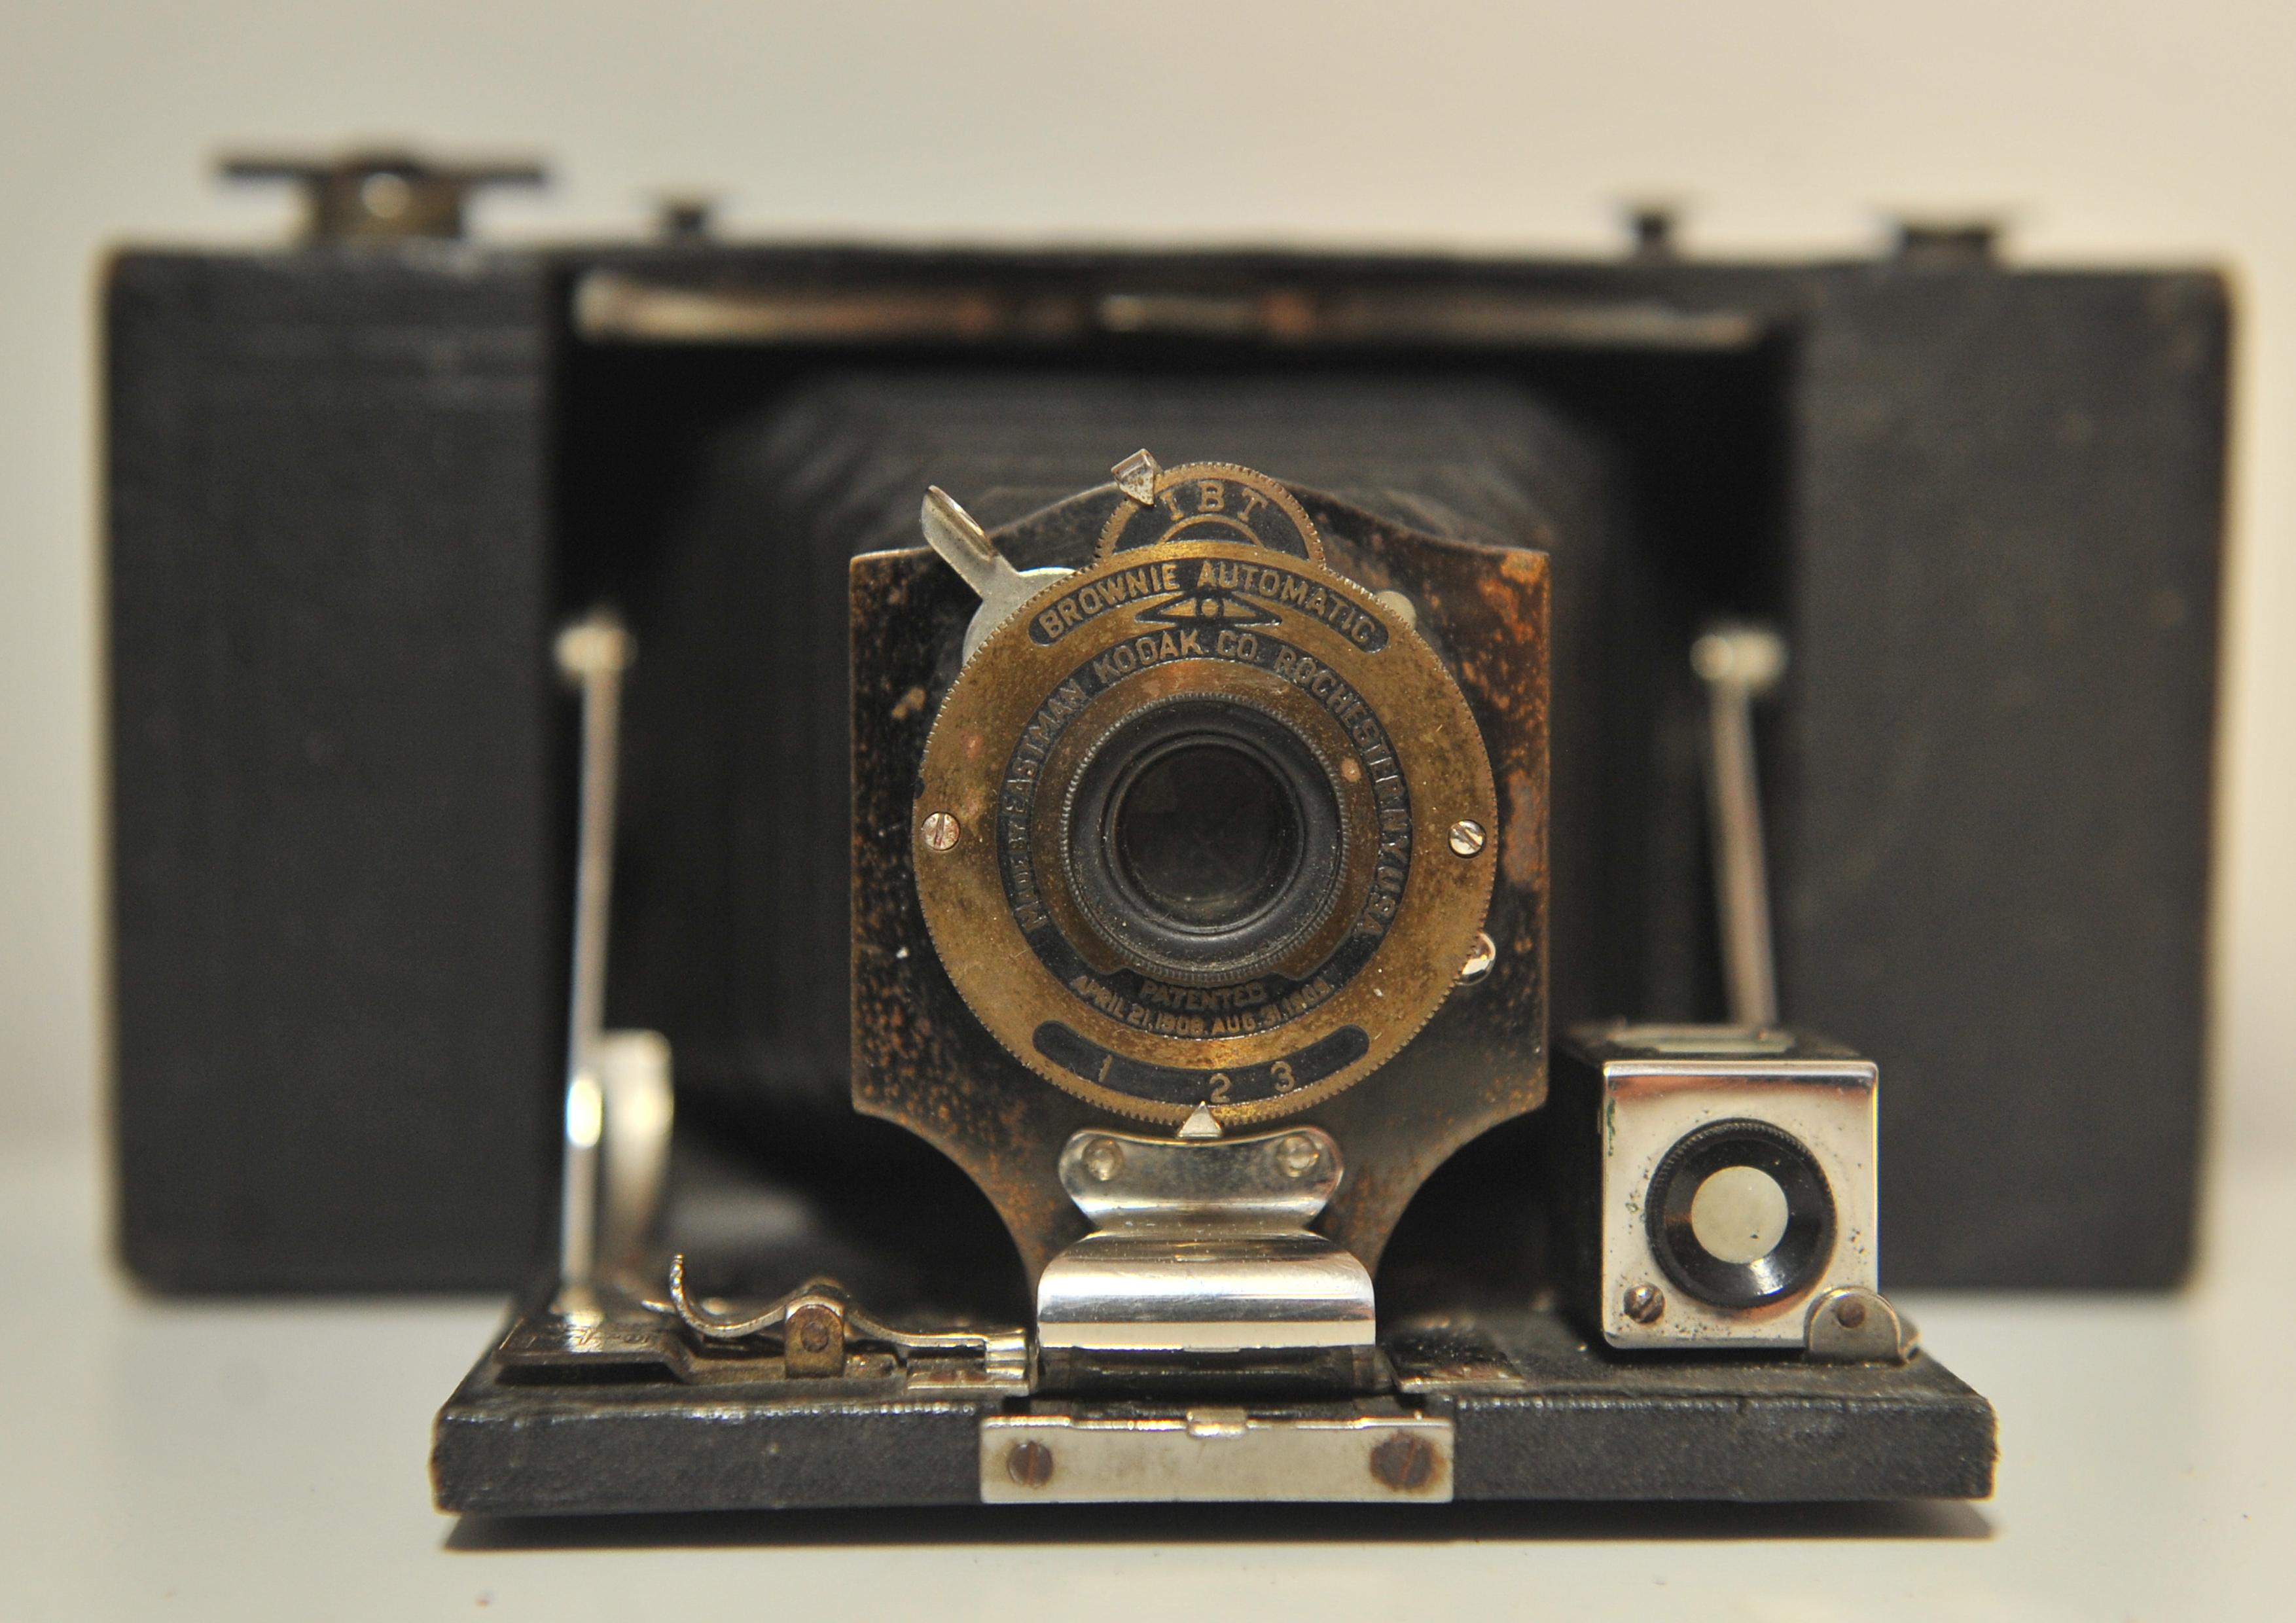 Kodak No 2 Folding Pocket Brownie Model B 120 Roll Film Camera USA 1909

The No 2 Folding Pocket Brownie is a folding camera made by Kodak in Rochester, NY, USA, from c. 1909. It has a rectangular, leatherette covered wooden body, and a sliding lens